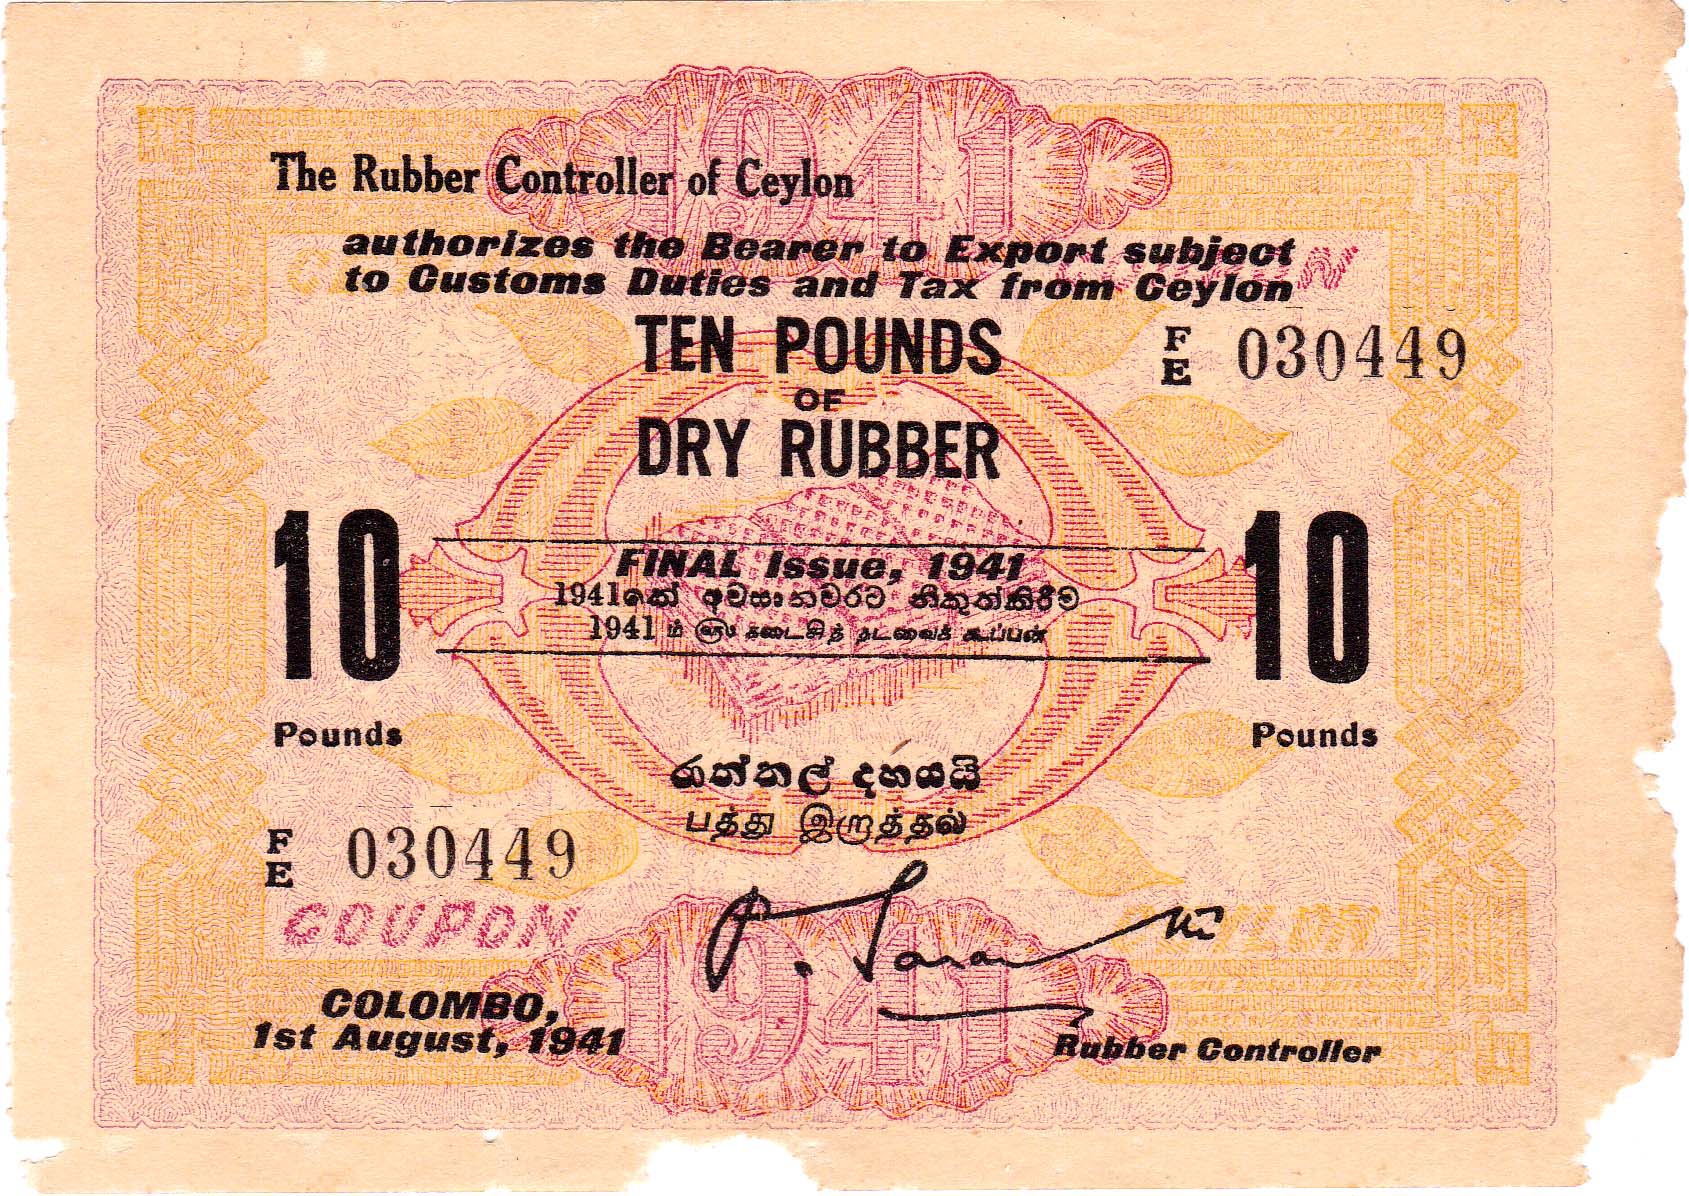 1941_fi_rubbercoupon_10lbs_front